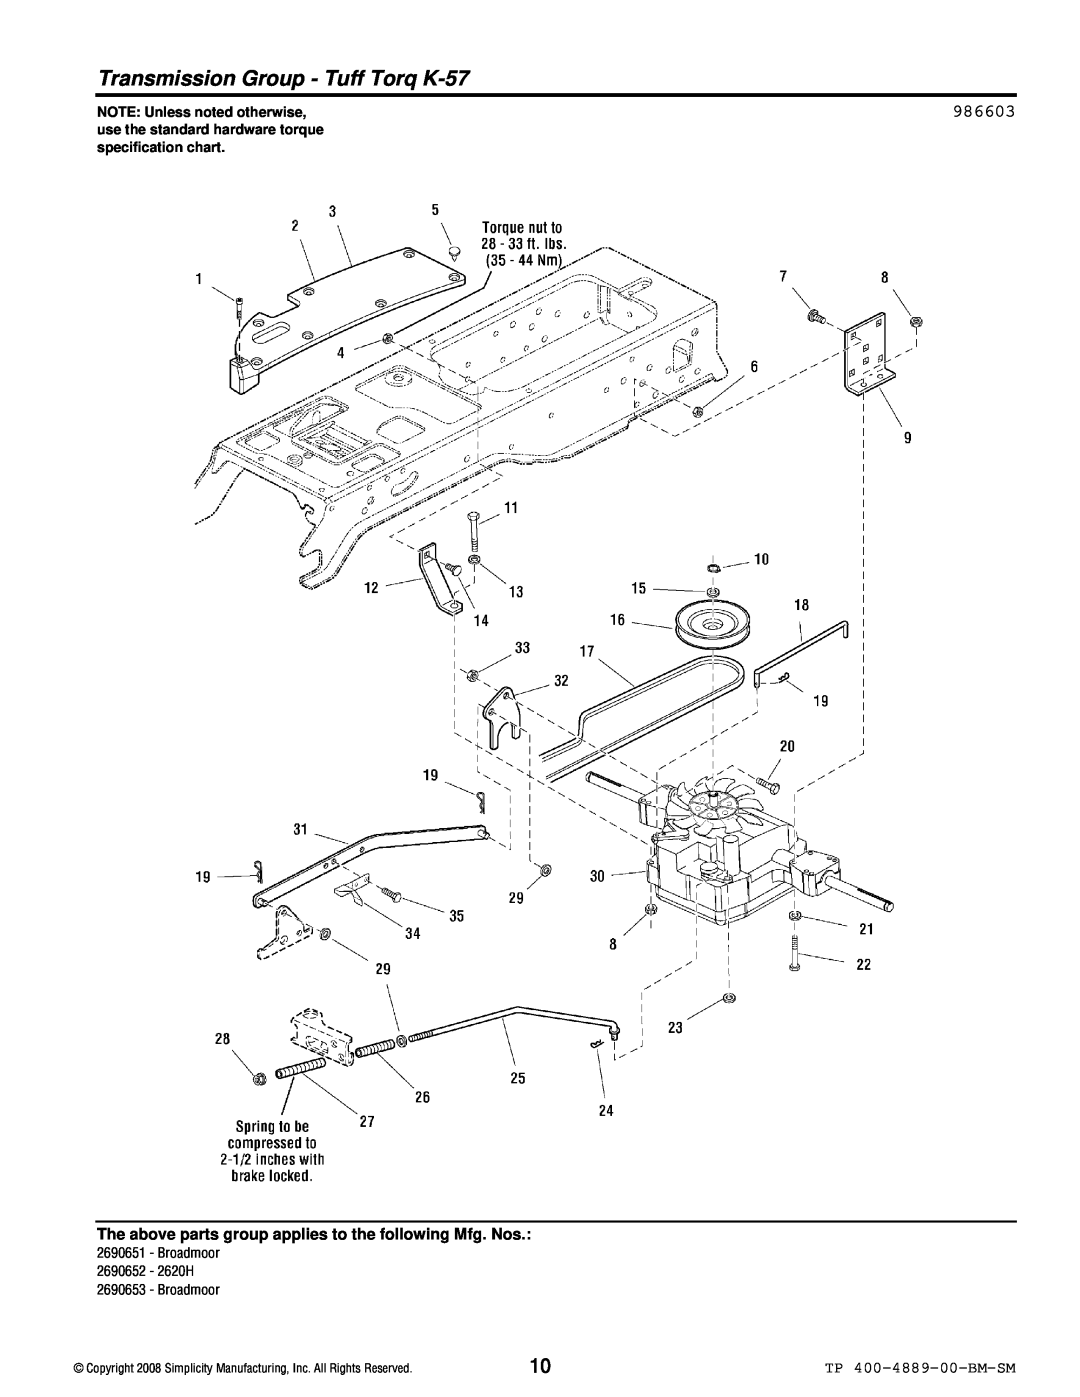 Simplicity 2600 Series Transmission Group - Tuff Torq K-57, 986603, TP 400-4889-00-BM-SM, NOTE: Unless noted otherwise 